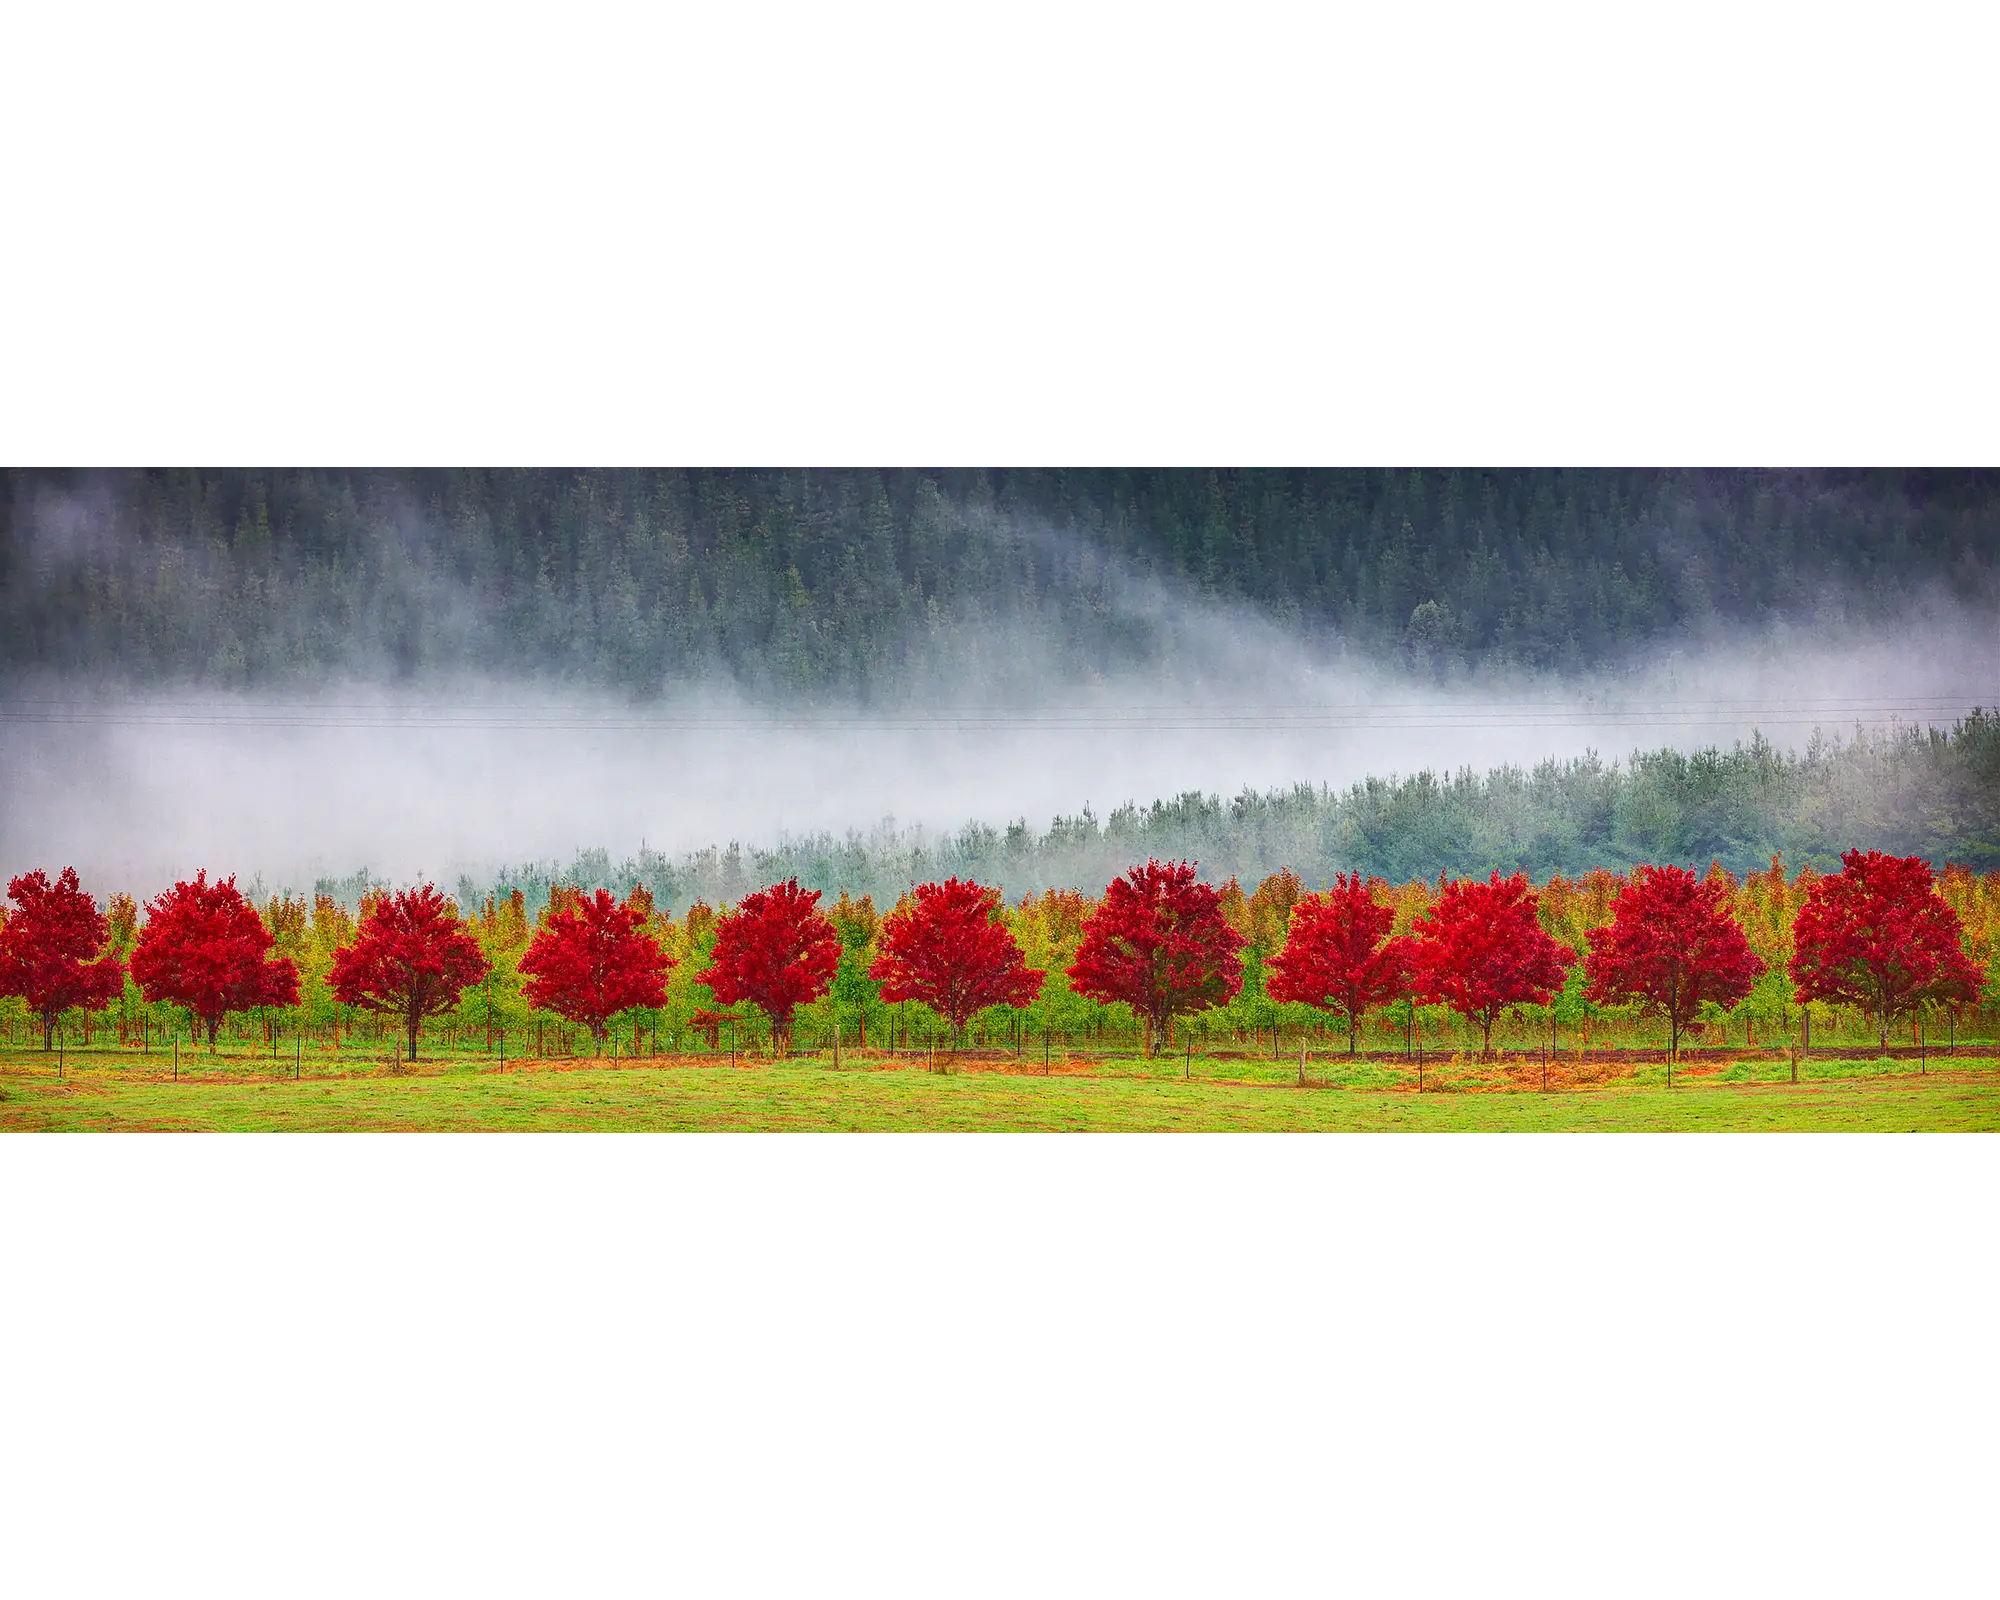 Red Row Of Trees - Apple orchard in fog, Alpine Shire, Victoria, Australia.